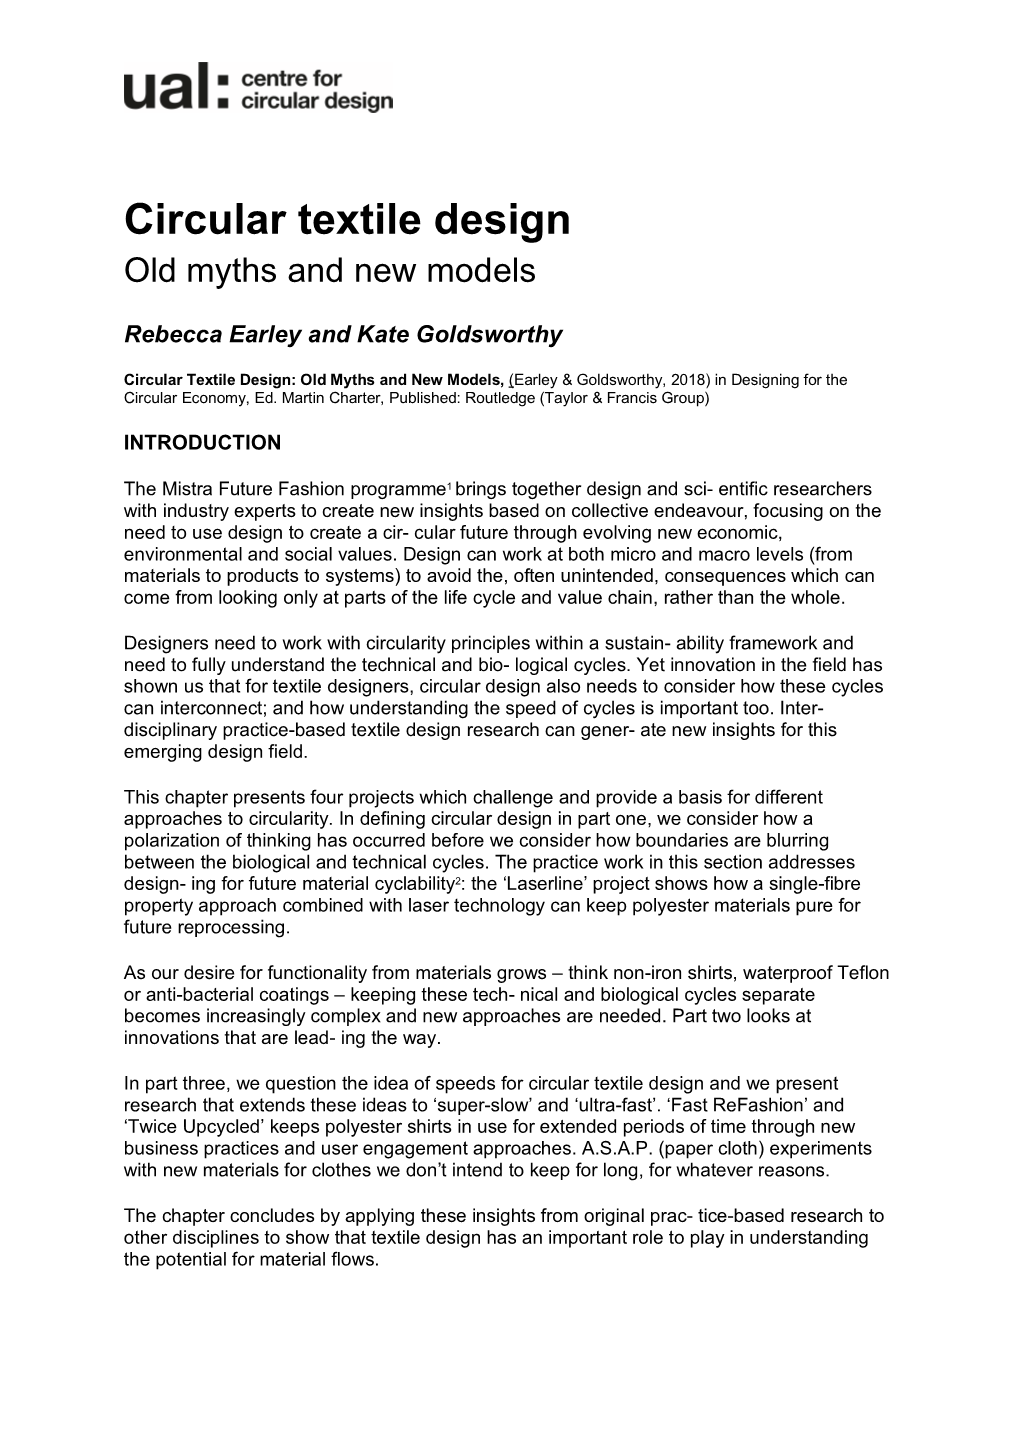 Circular Textile Design: Old Myths and New Models, (Earley & Goldsworthy, 2018) in Designing for the Circular Economy, Ed